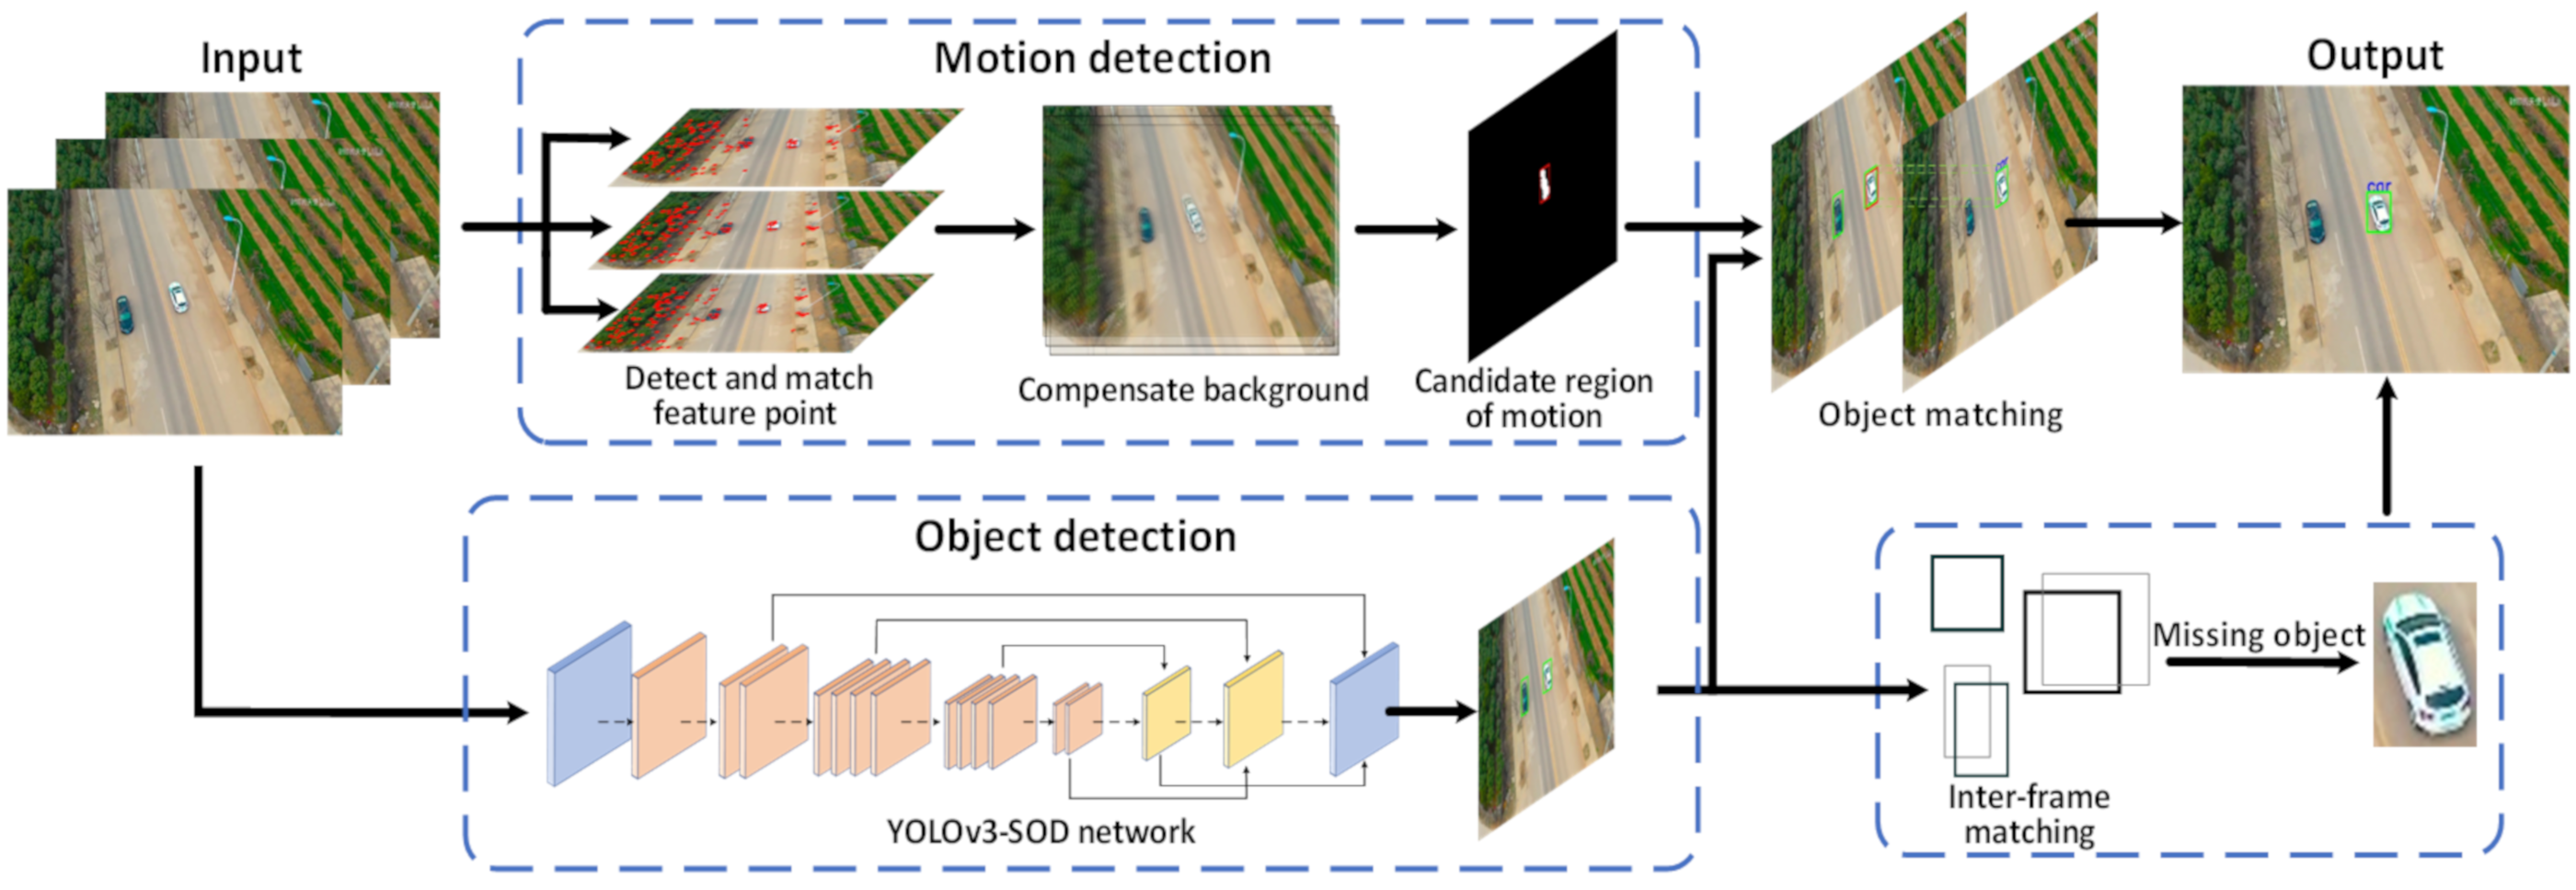 Object detected. Motion Detection. Object Detection. OPENCV object Detection. Object Detection на дороге.